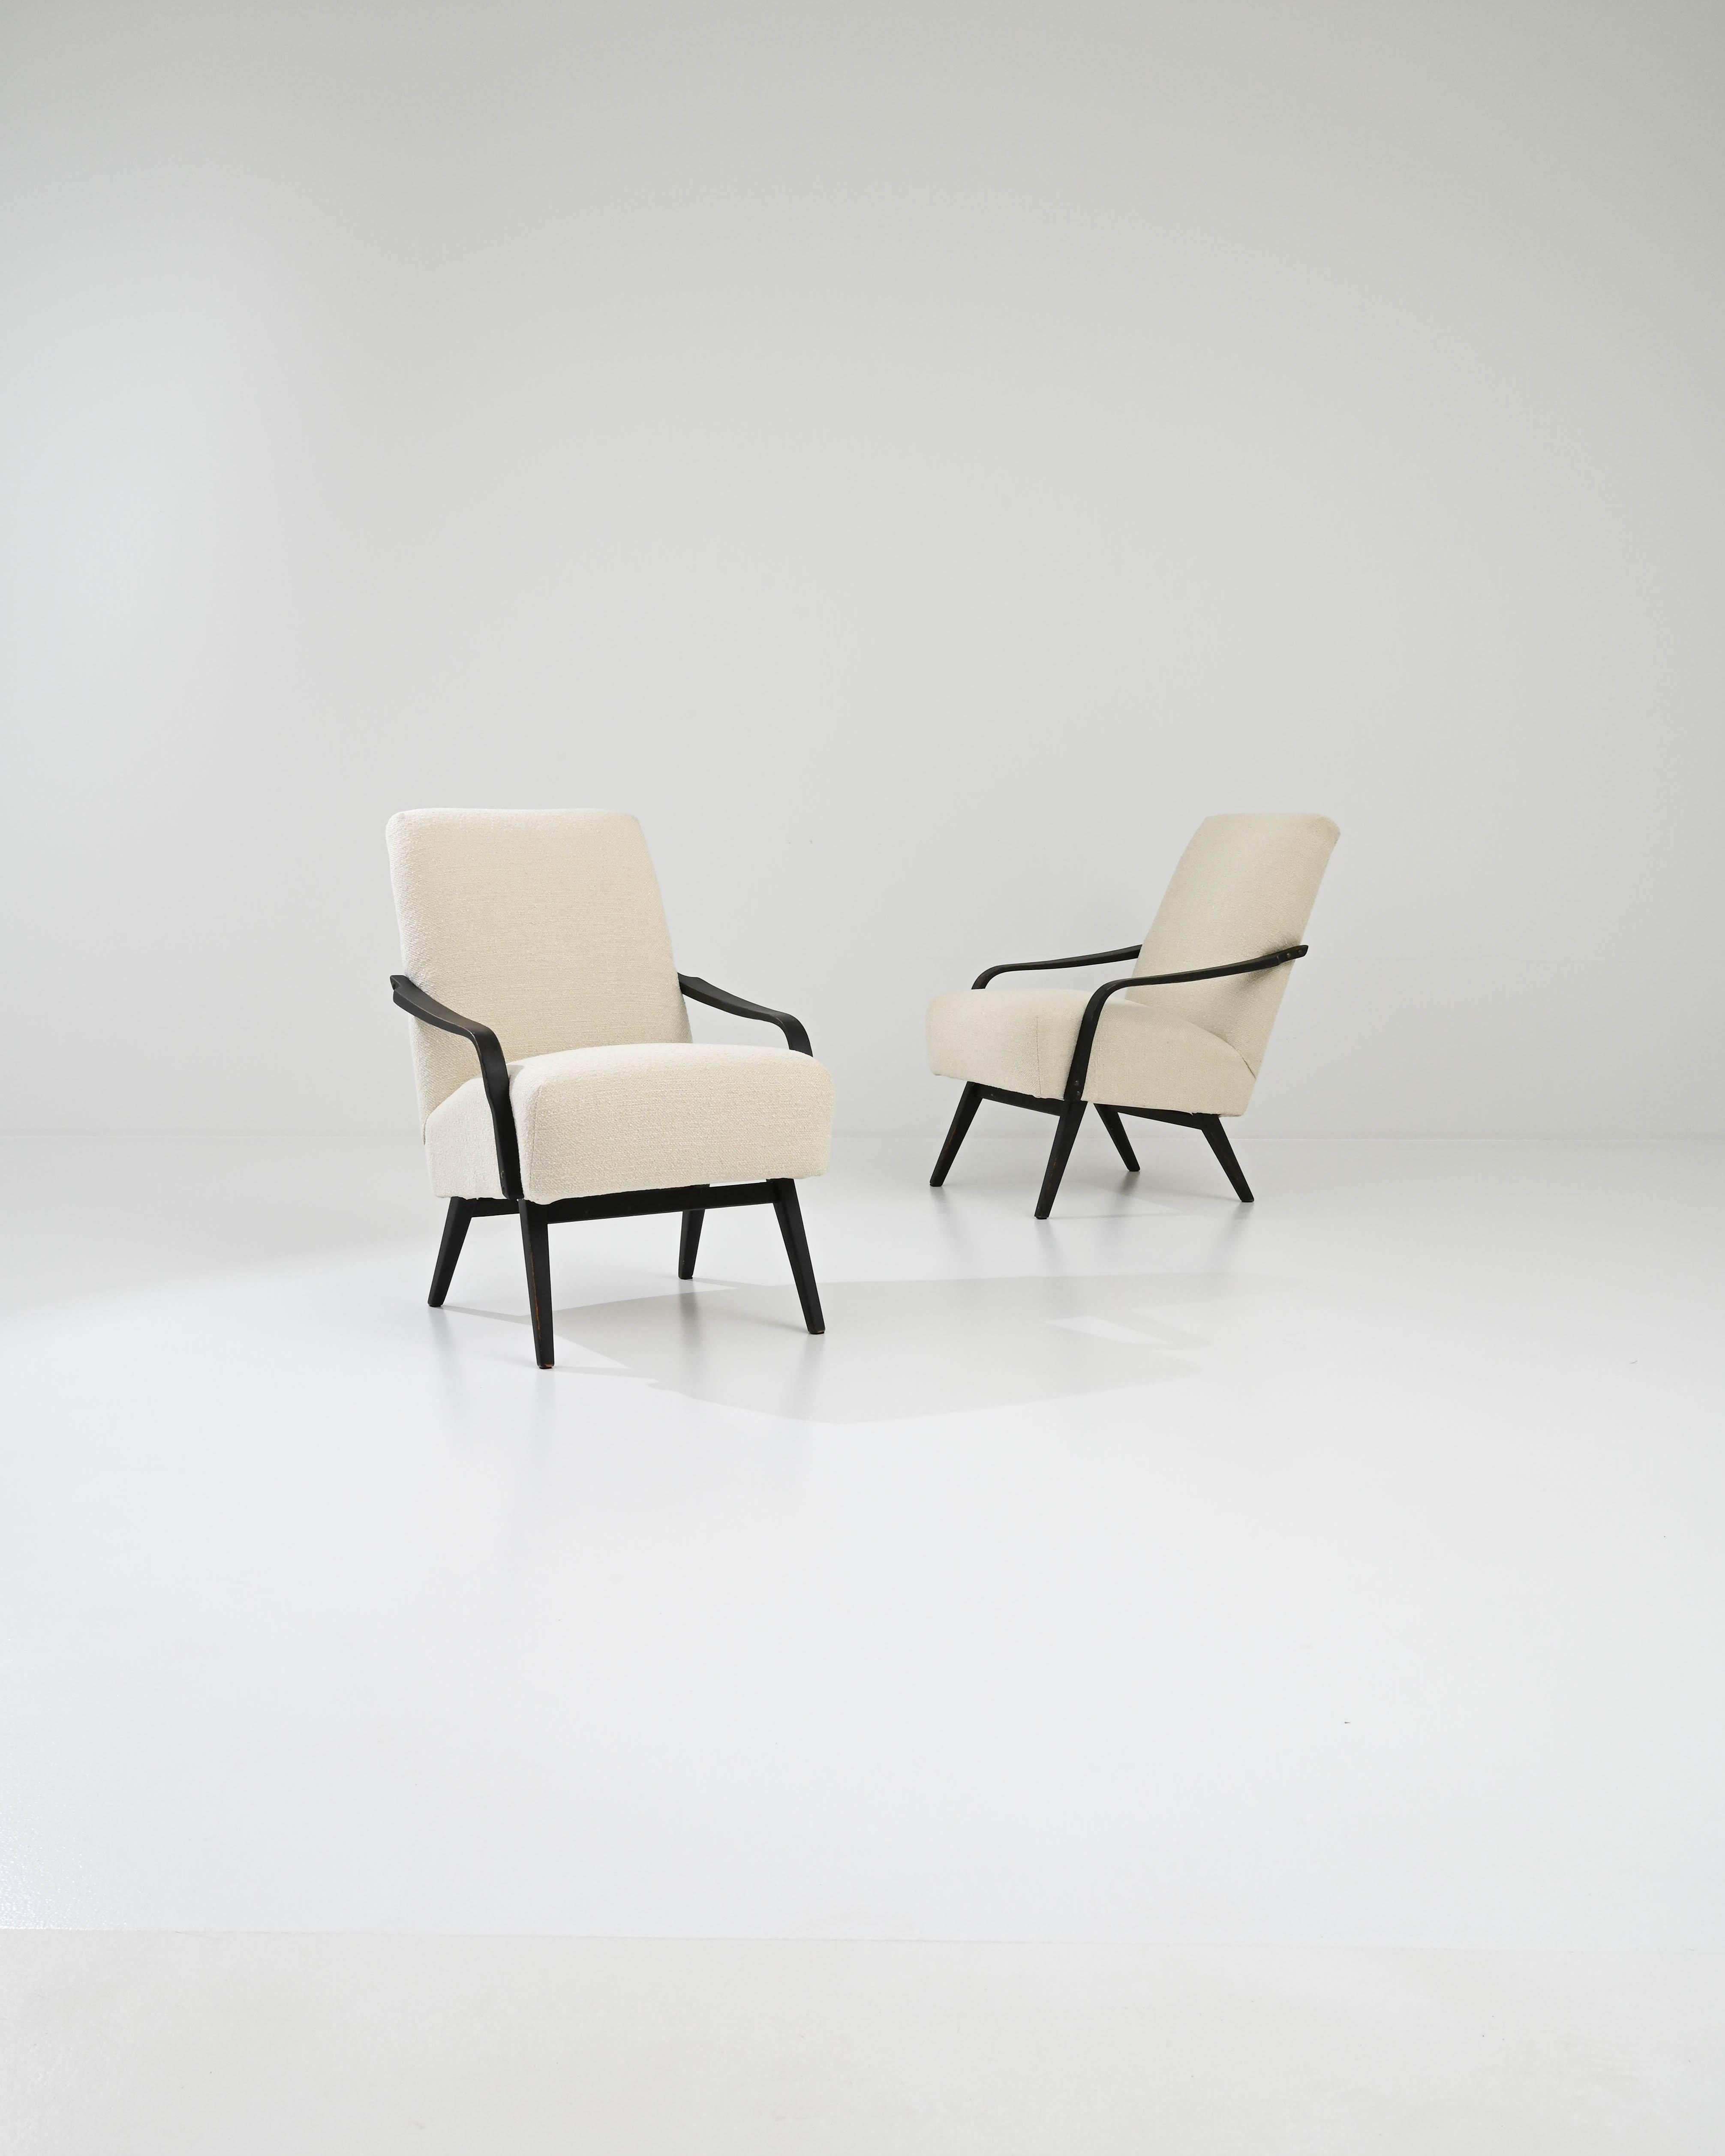 This beautiful pair of Mid-Century Modern armchairs were made in Czechia by renowned furniture manufacturers TON, design attributed to J. Smidek. Low-set and comfortable, a deep seat upholstered in soft boucle is set at a gentle recline. Sloping